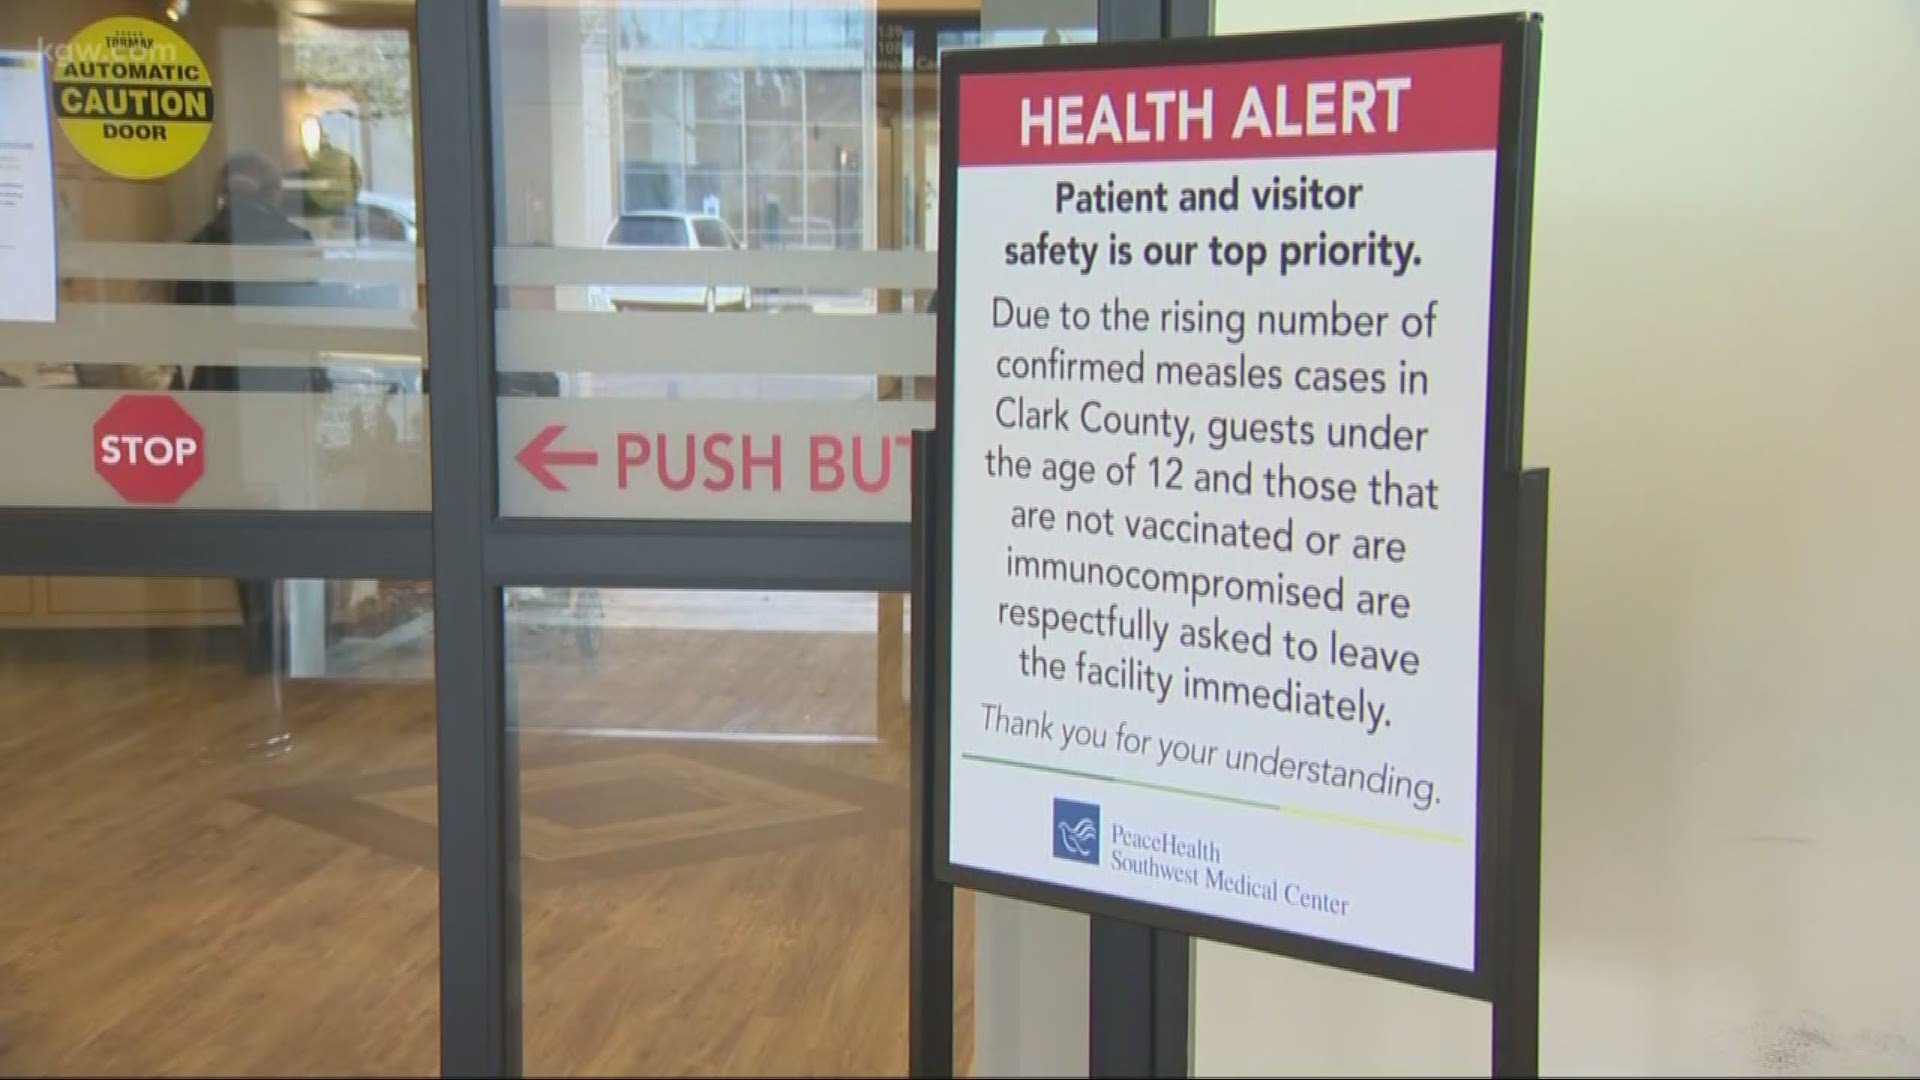 There are now 35 confirmed cases of measles in Clark County.